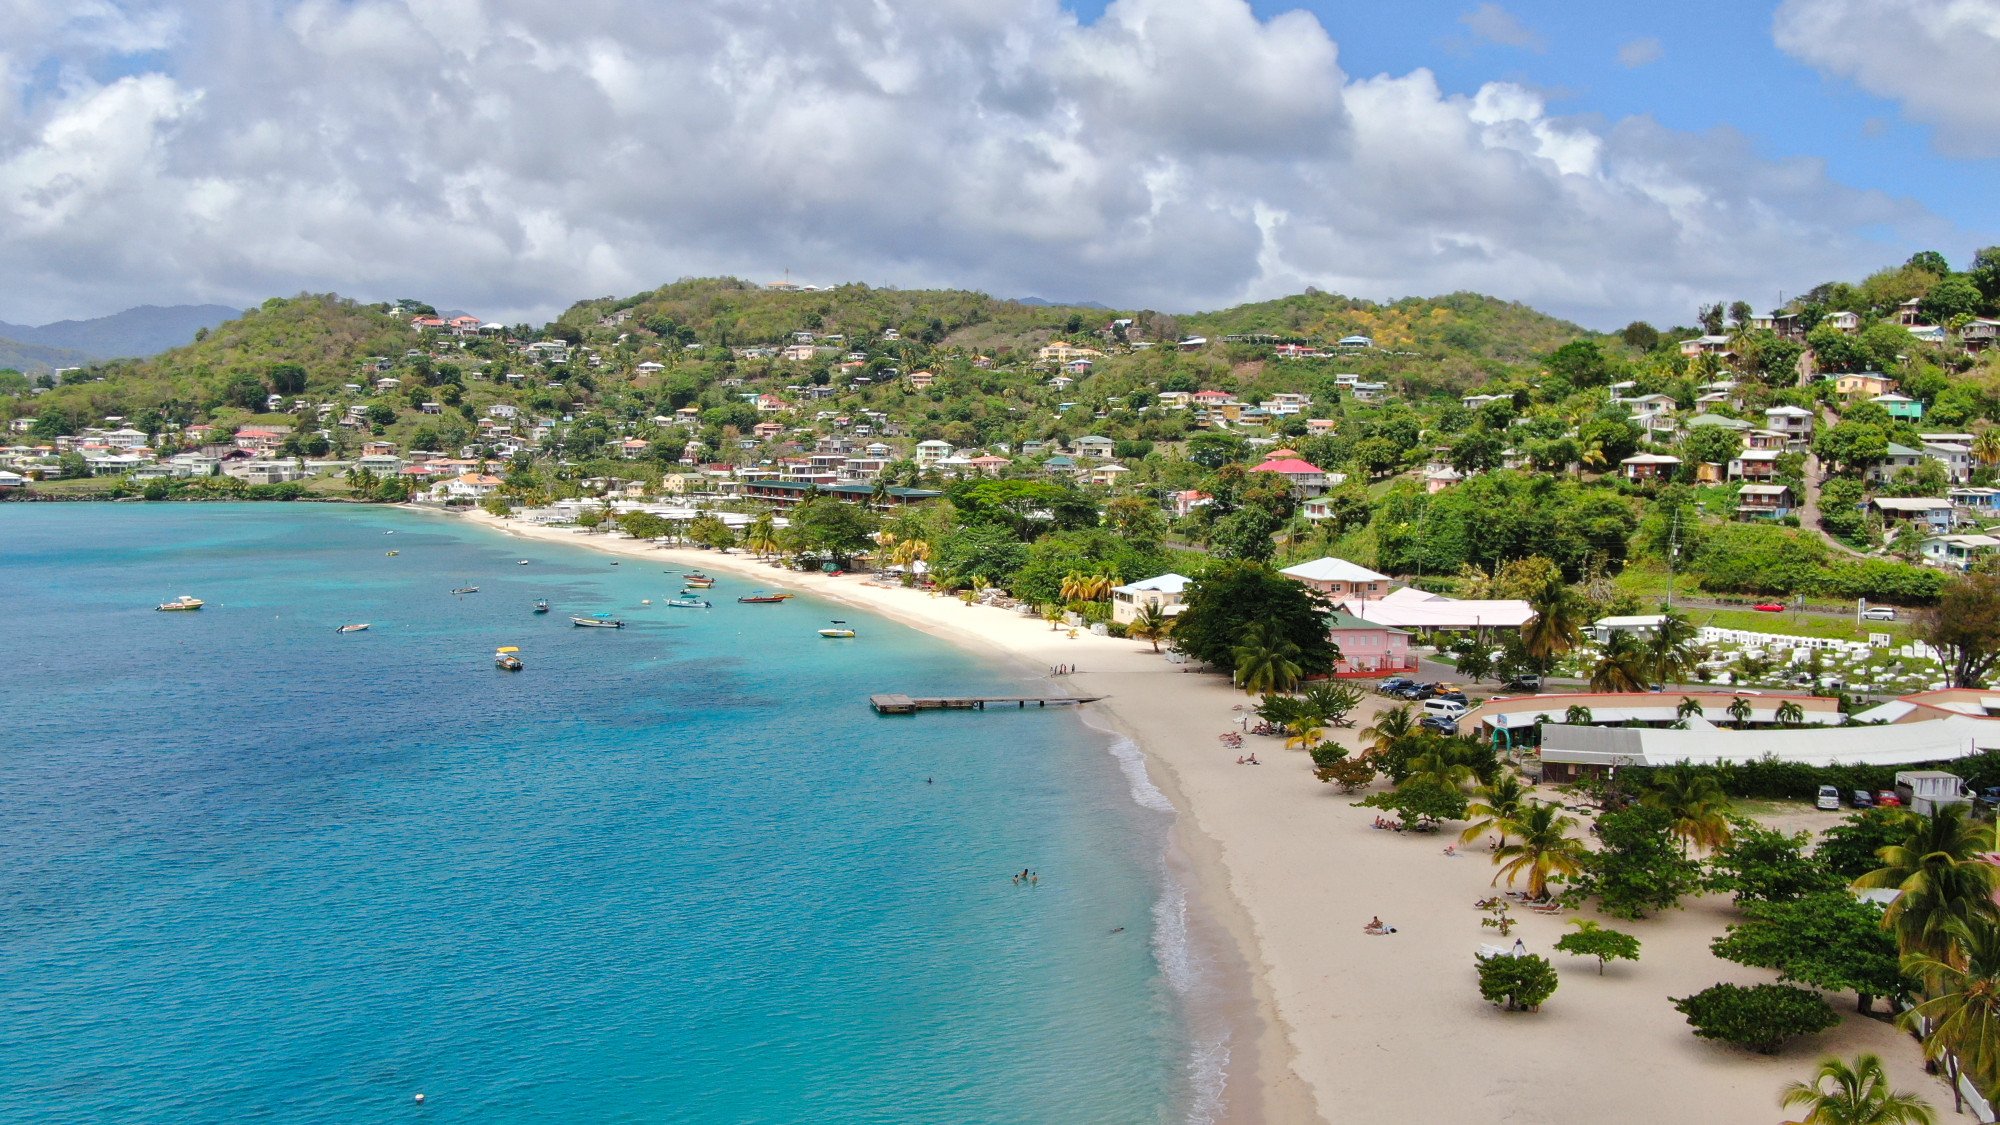 The crystal-clear beaches of Grenada. Photo: Shutterstock